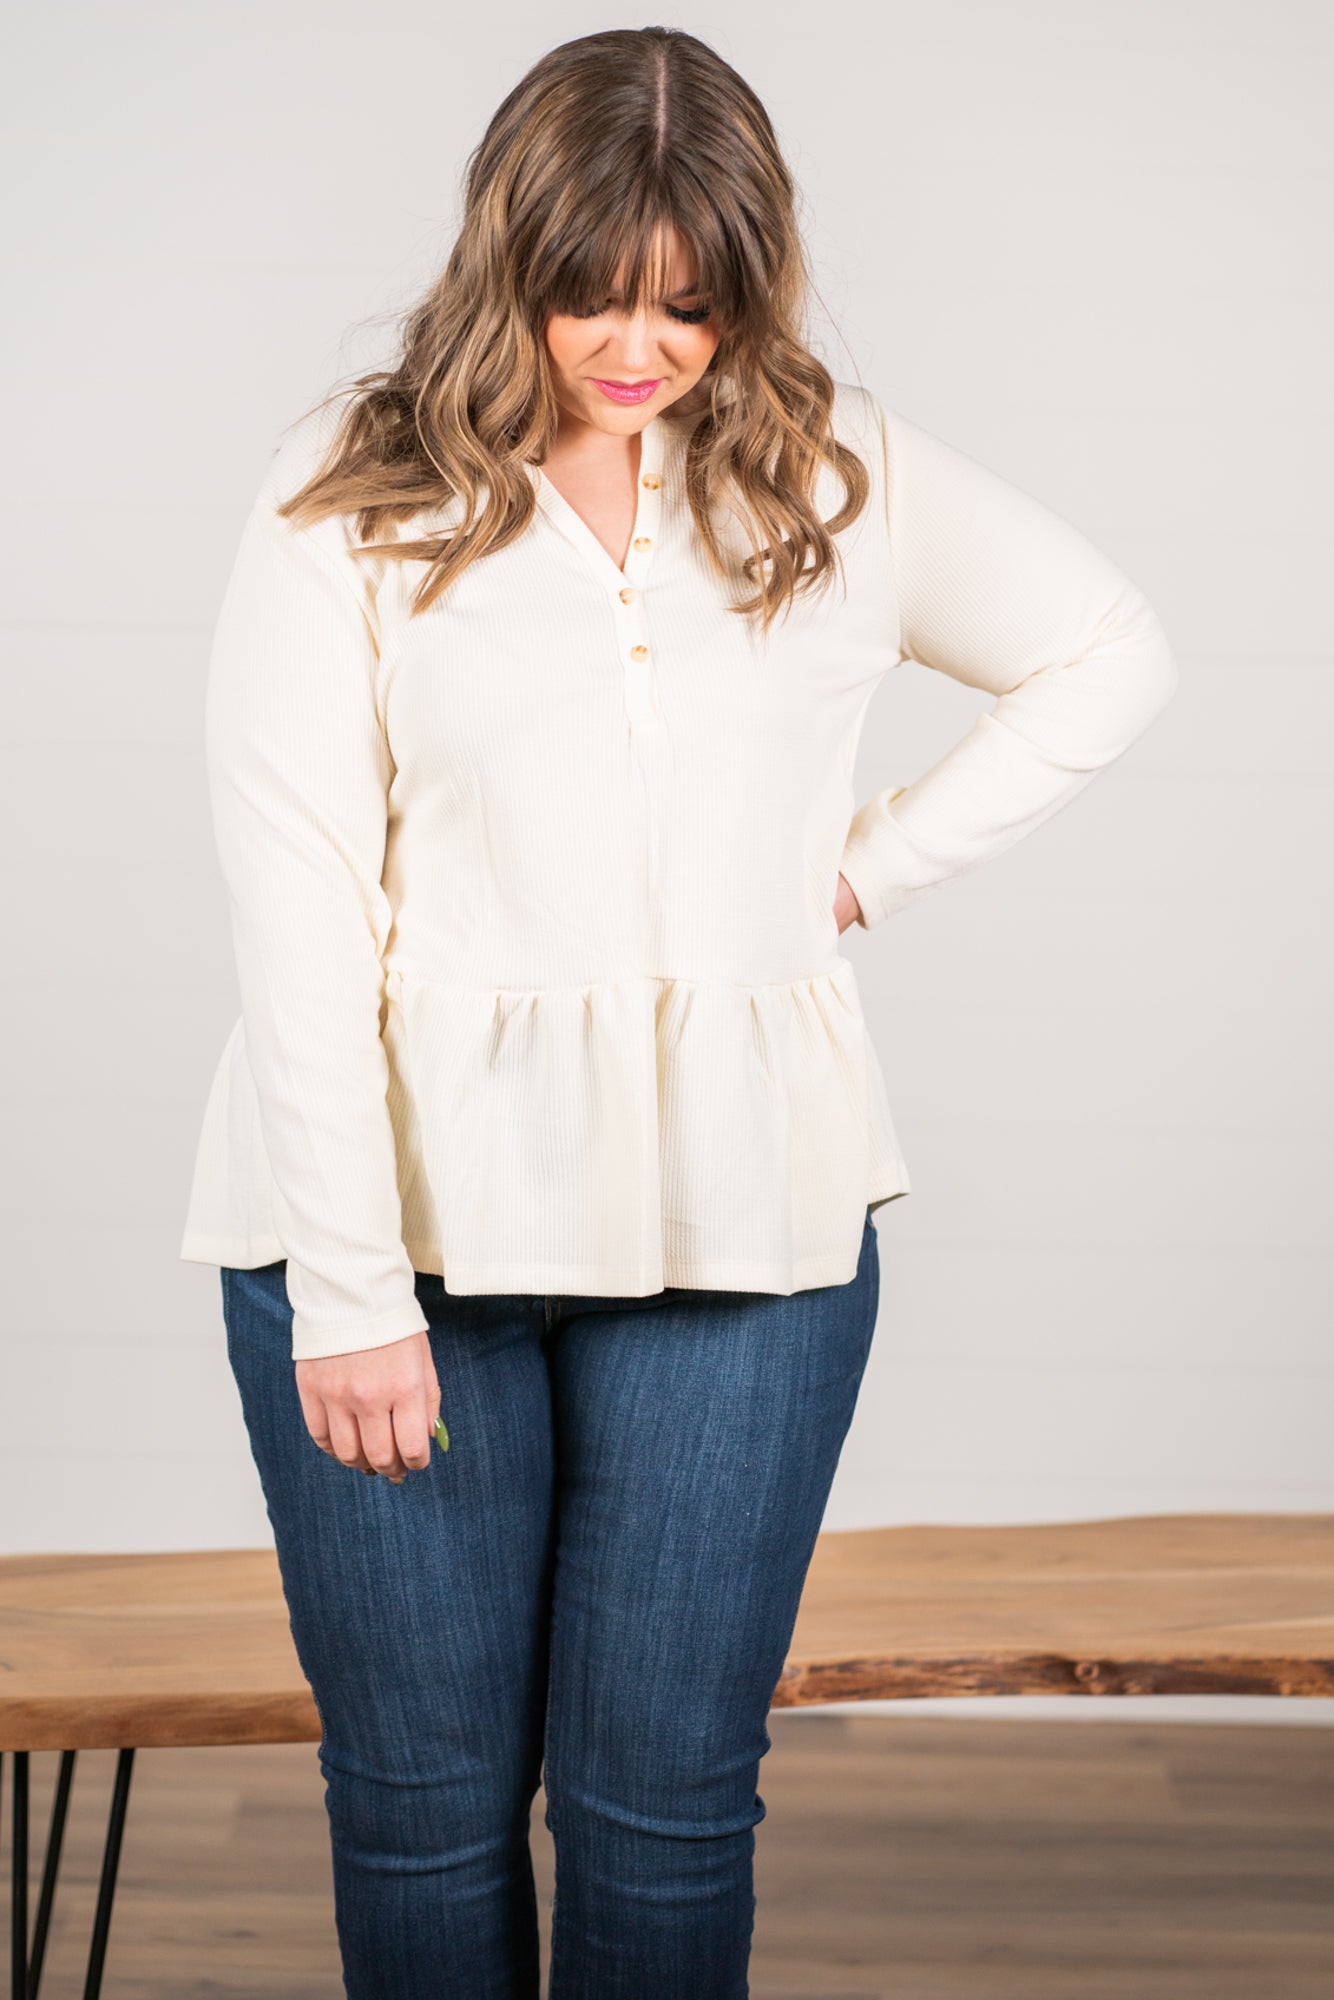 Blu Pepper Color: Ivory Ribbed Knit Long Sleeves Henley Neckline 94% POLYESTER 6% SPANDEX Style #: PCR1253 Contact us for any additional measurements or sizing. 